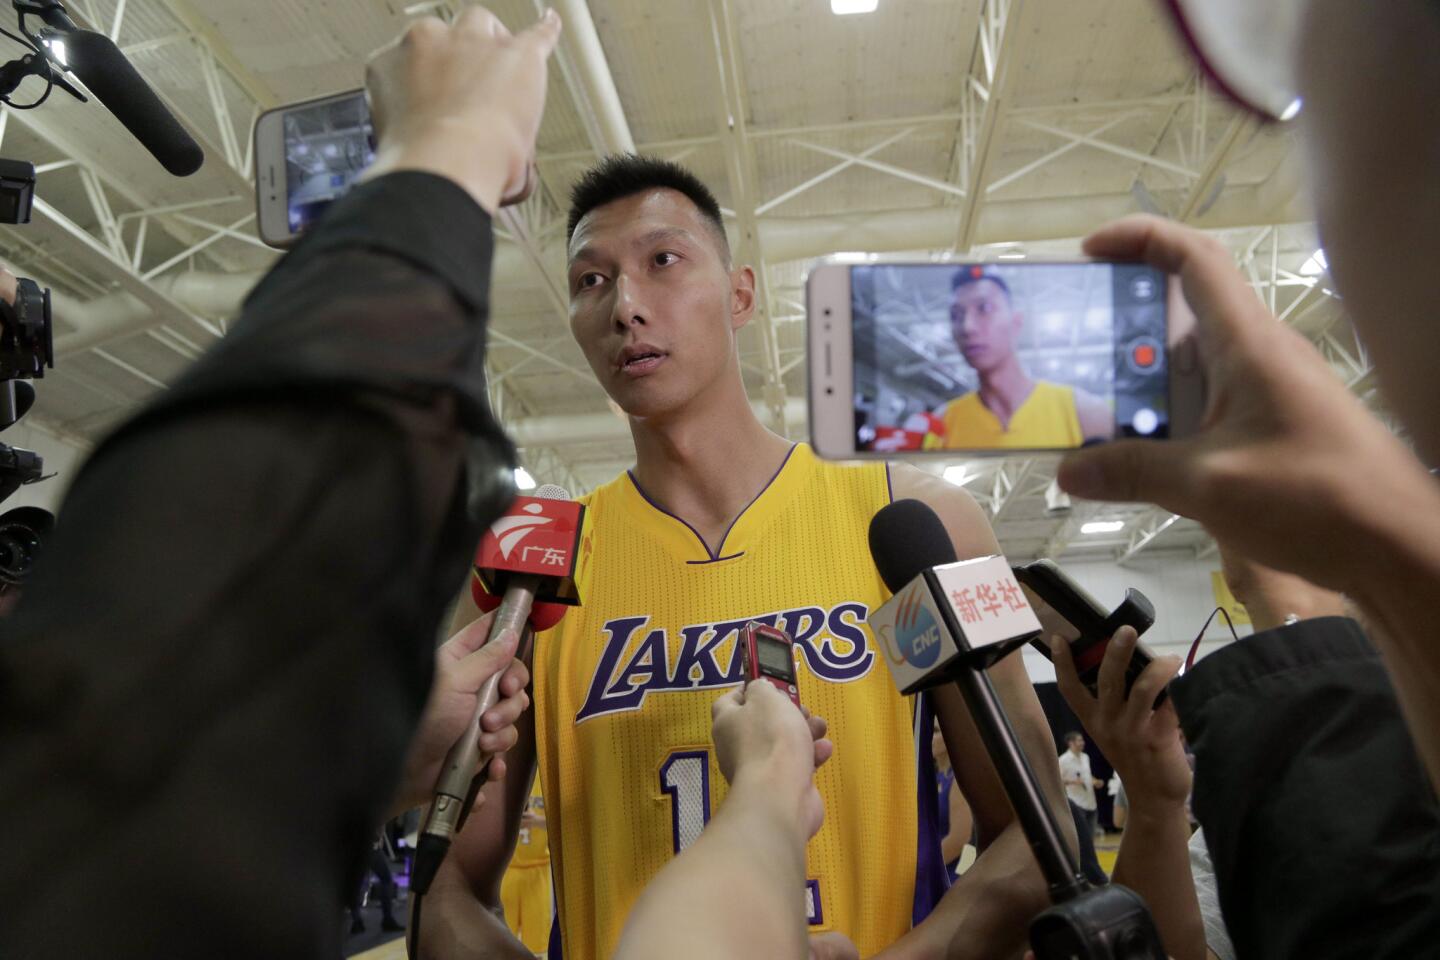 Los Angeles Lakers' Yi Jianlian talks to reporters during the team's NBA basketball media day in El Segundo, Calif., on Monday, Sept. 26, 2016. (AP Photo/Nick Ut)